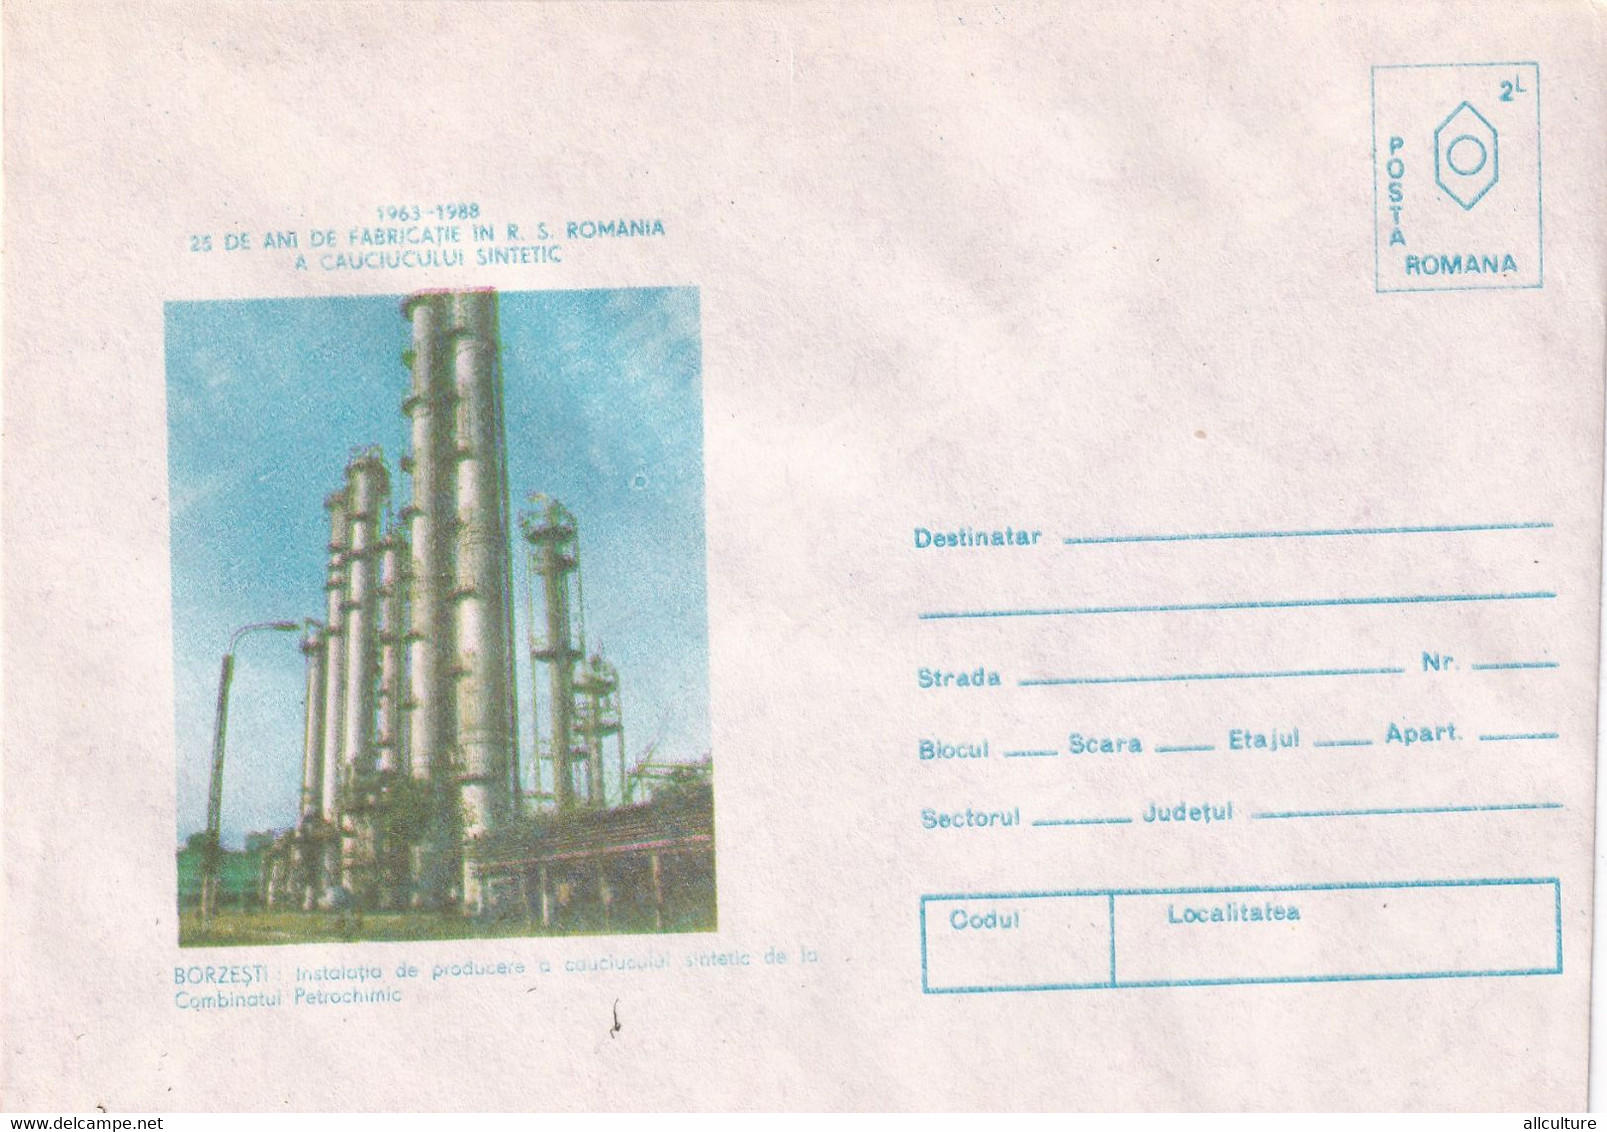 A3118 - 25 Years Of Manufacturing Synthetic Rubber, Petrochemical Plant, Borzesti  Romania Cover Stationery - Fabriken Und Industrien